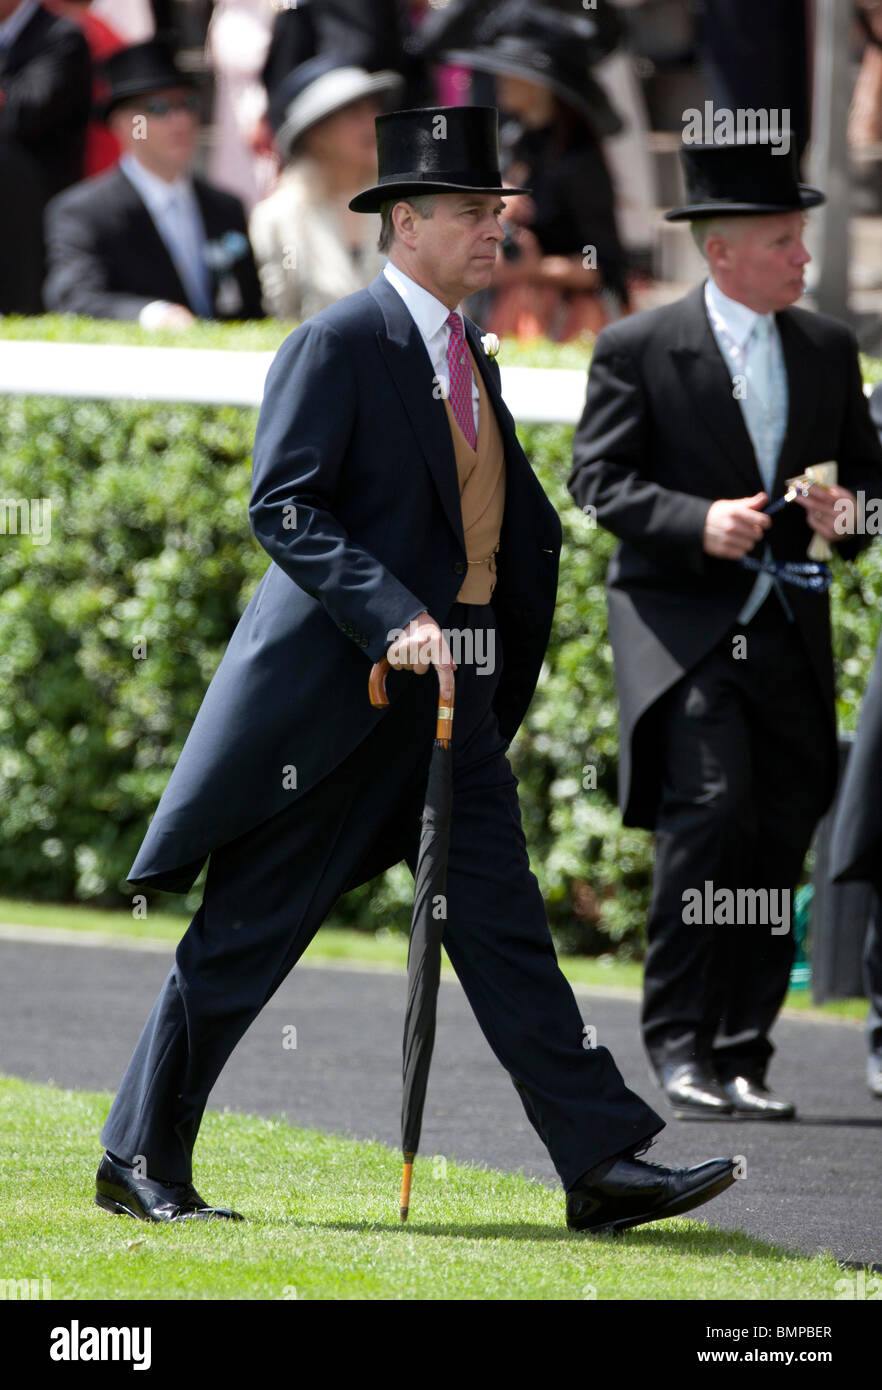 Britain's Prince Andrew in top hat, tails and carrying an umbrella in the paddock ring at the Royal Ascot race meeting Stock Photo